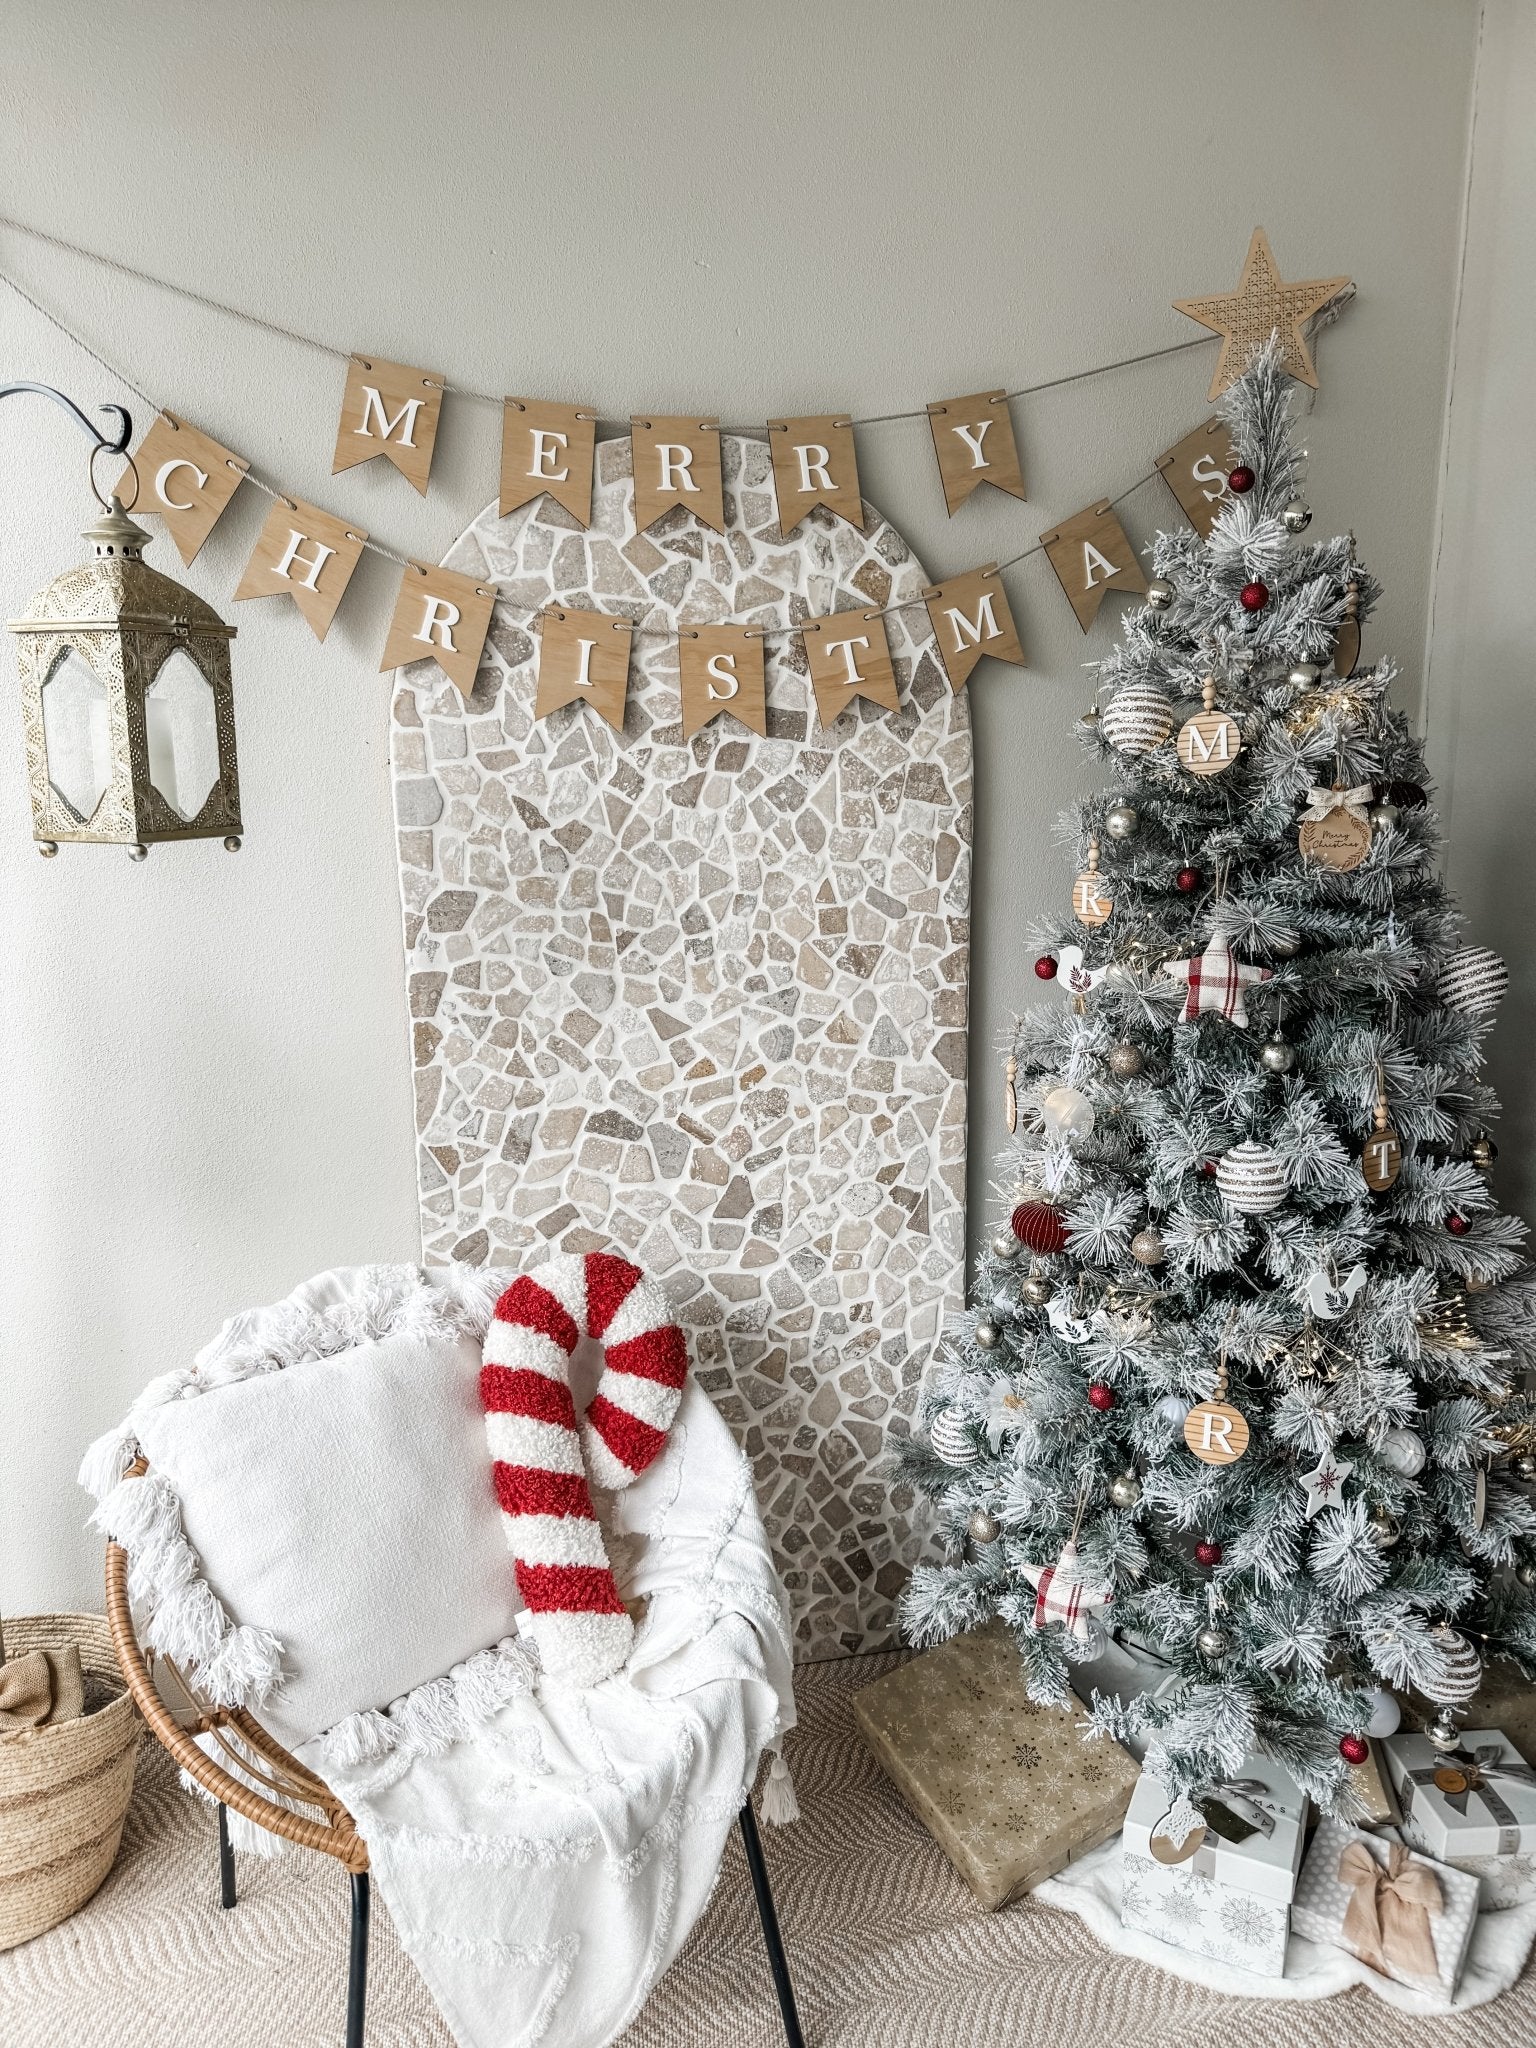 Merry Christmas Wooden Bunting with Acrylic Letters - The Humble Gift Co.